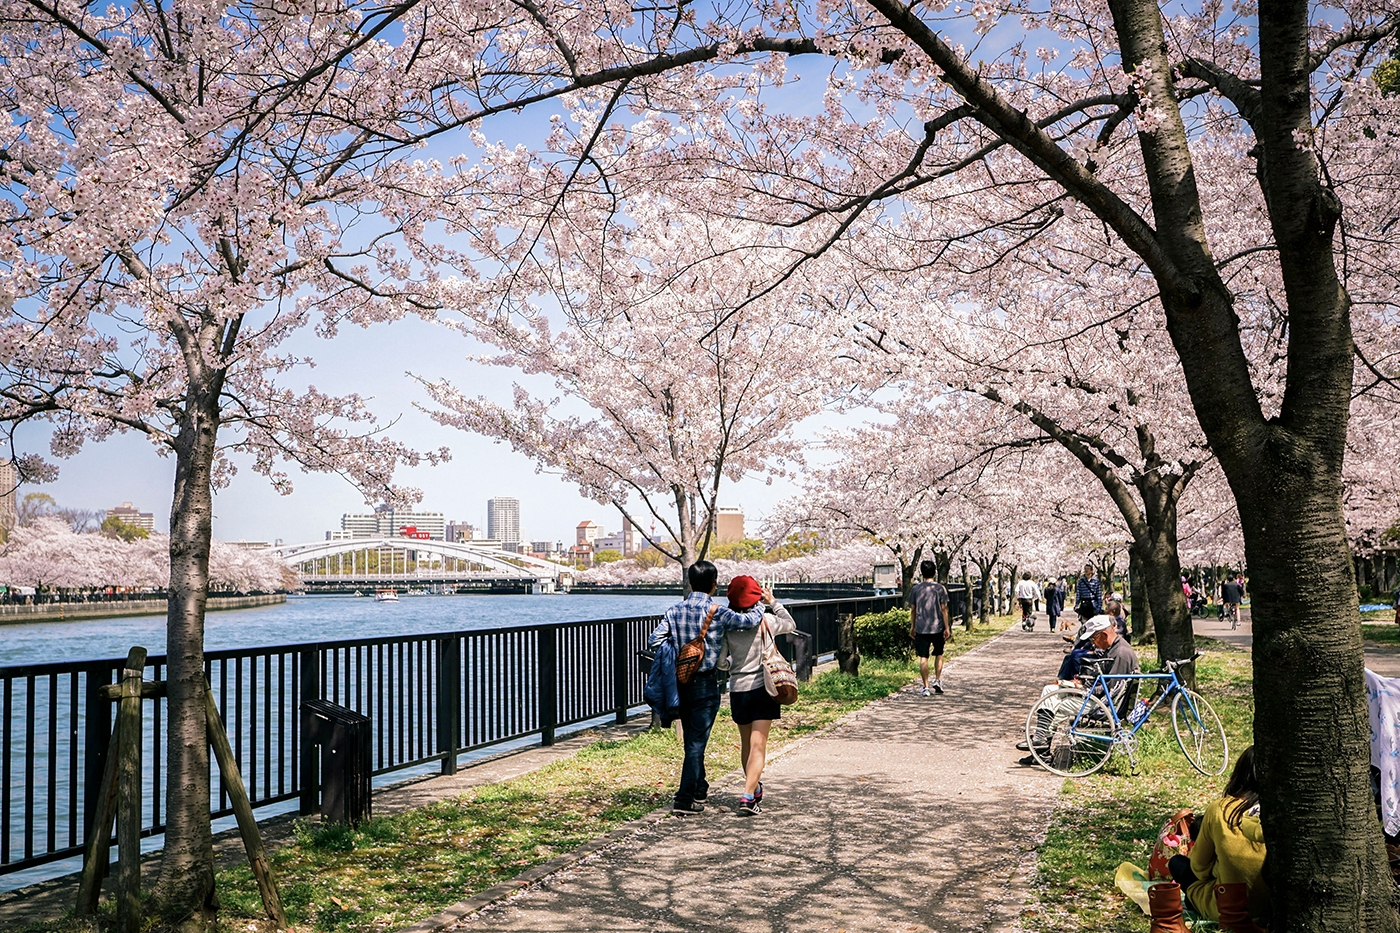 The riverbank becomes a canvas of pink as cherry blossoms bloom along the scenic Kema Sakuranomiya Park